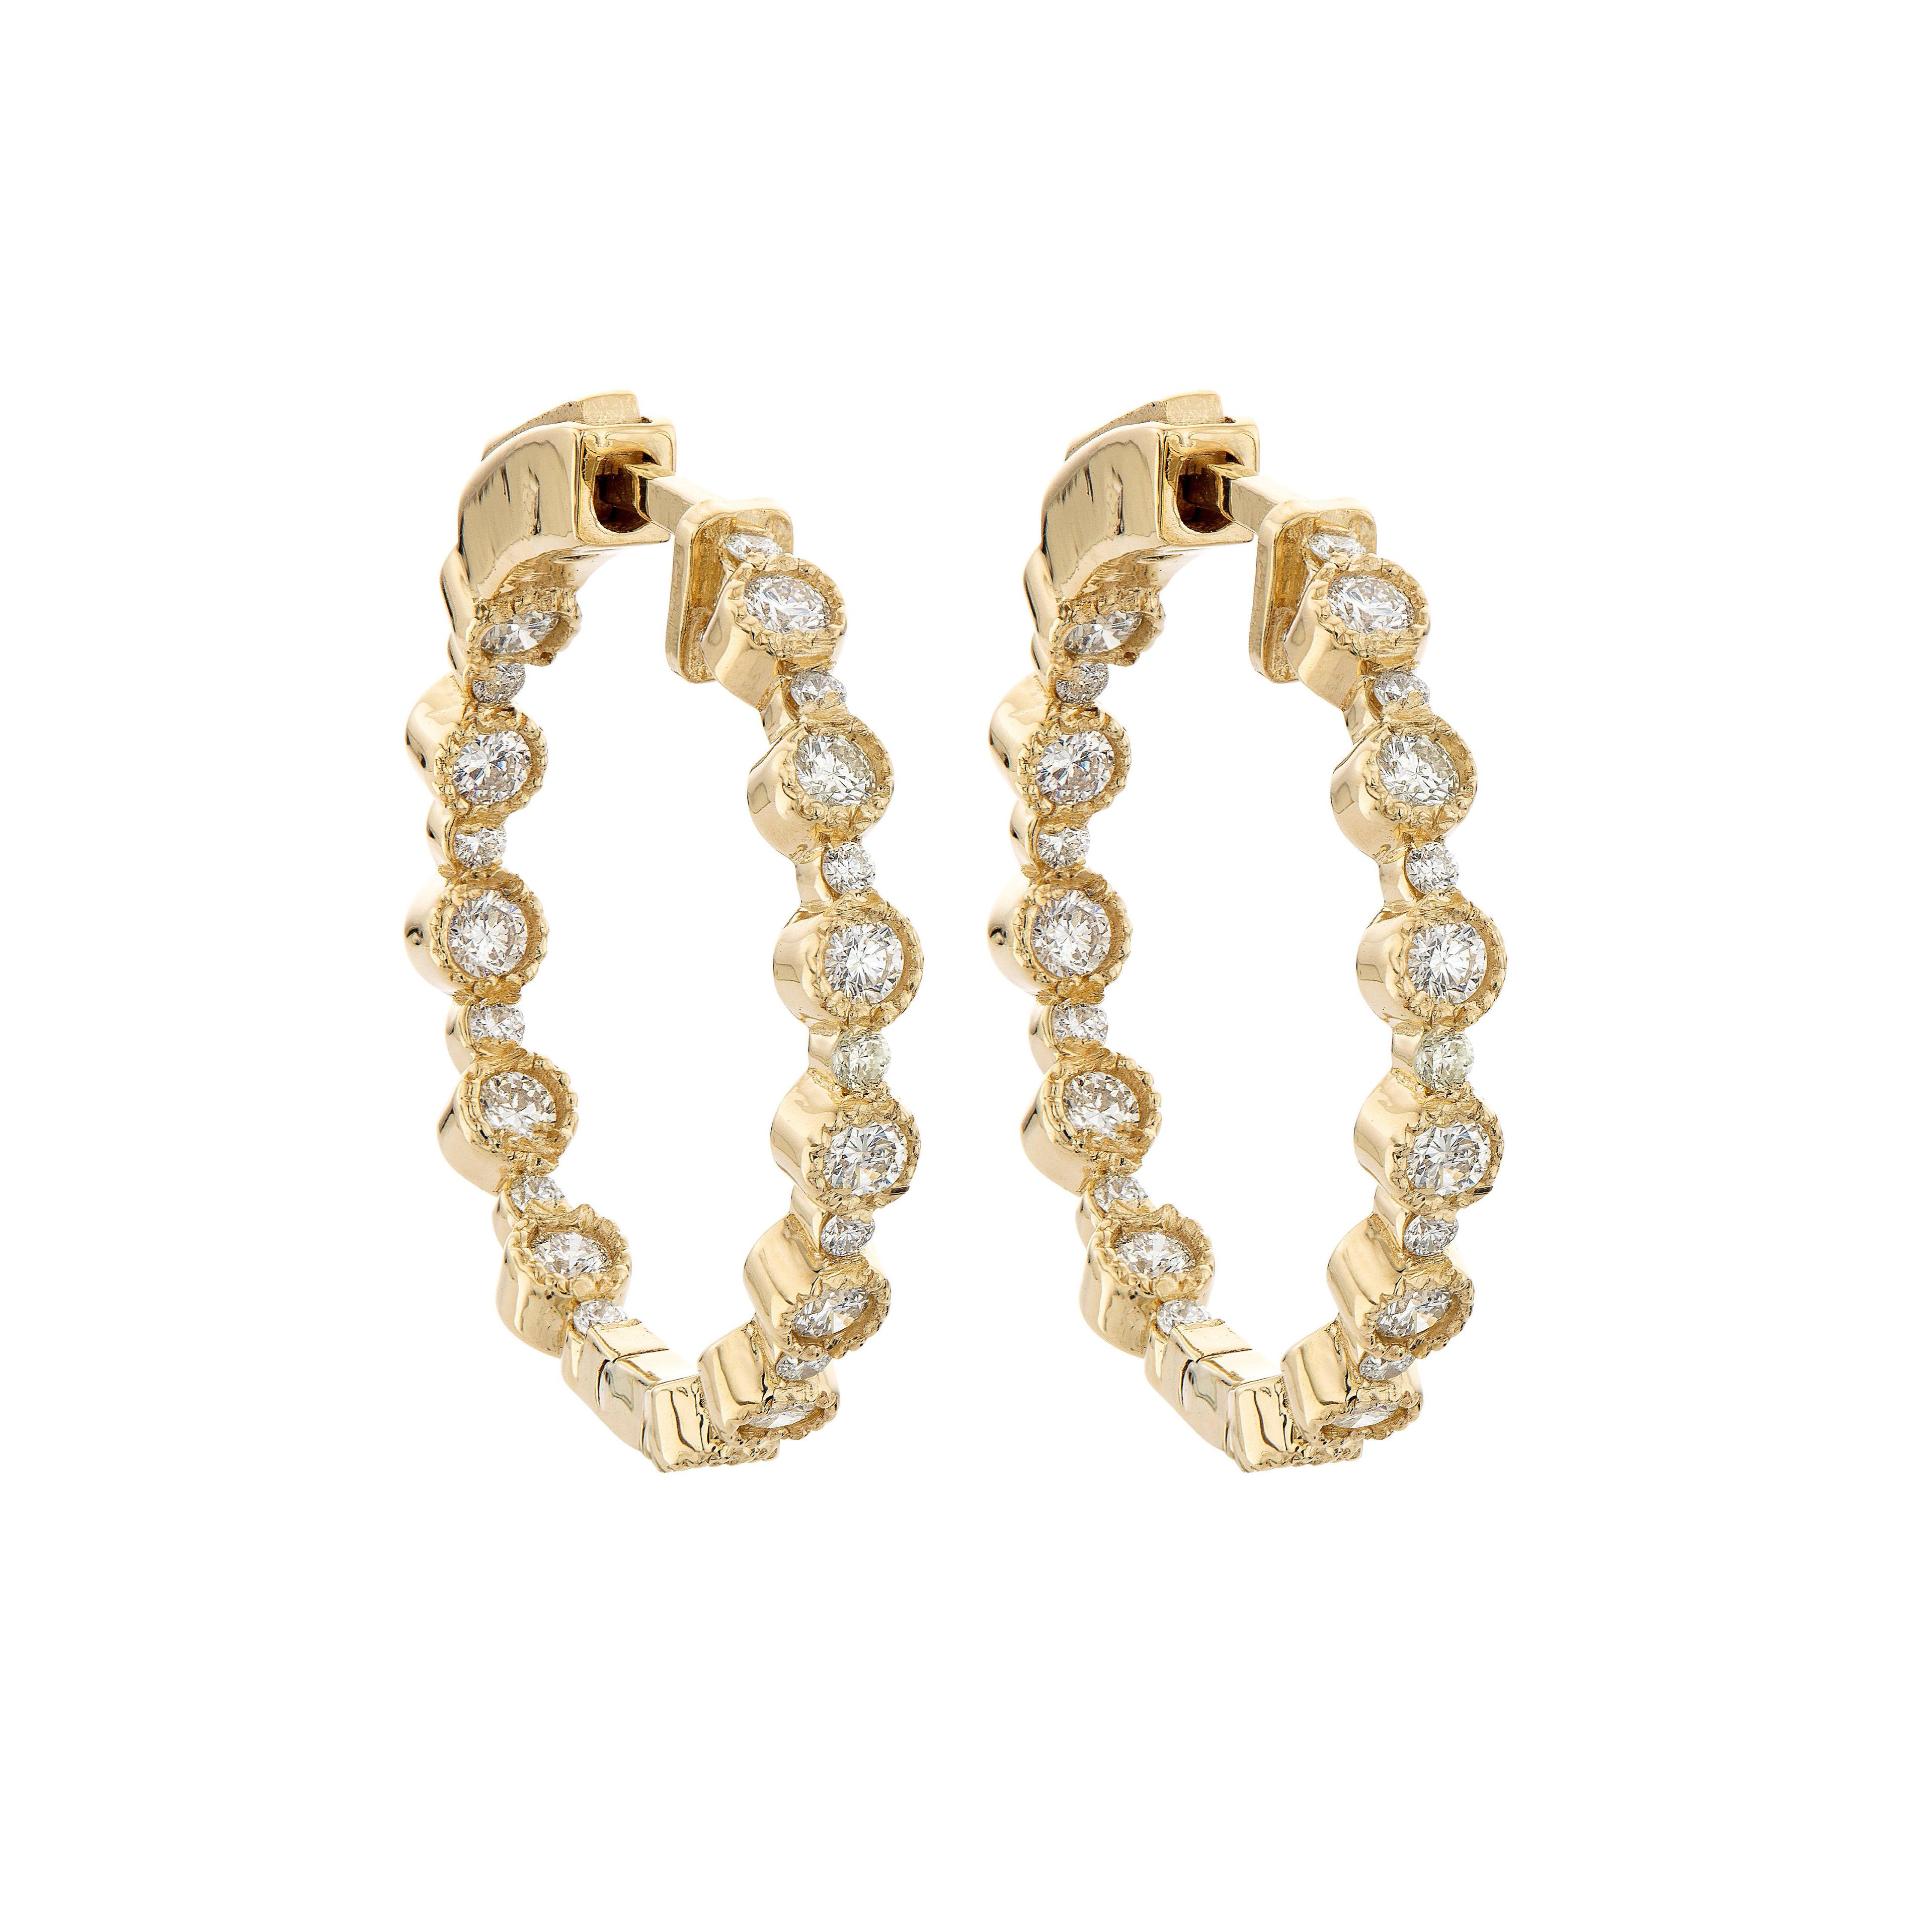 Alternating Small and Large Round Diamond Hoop Earrings